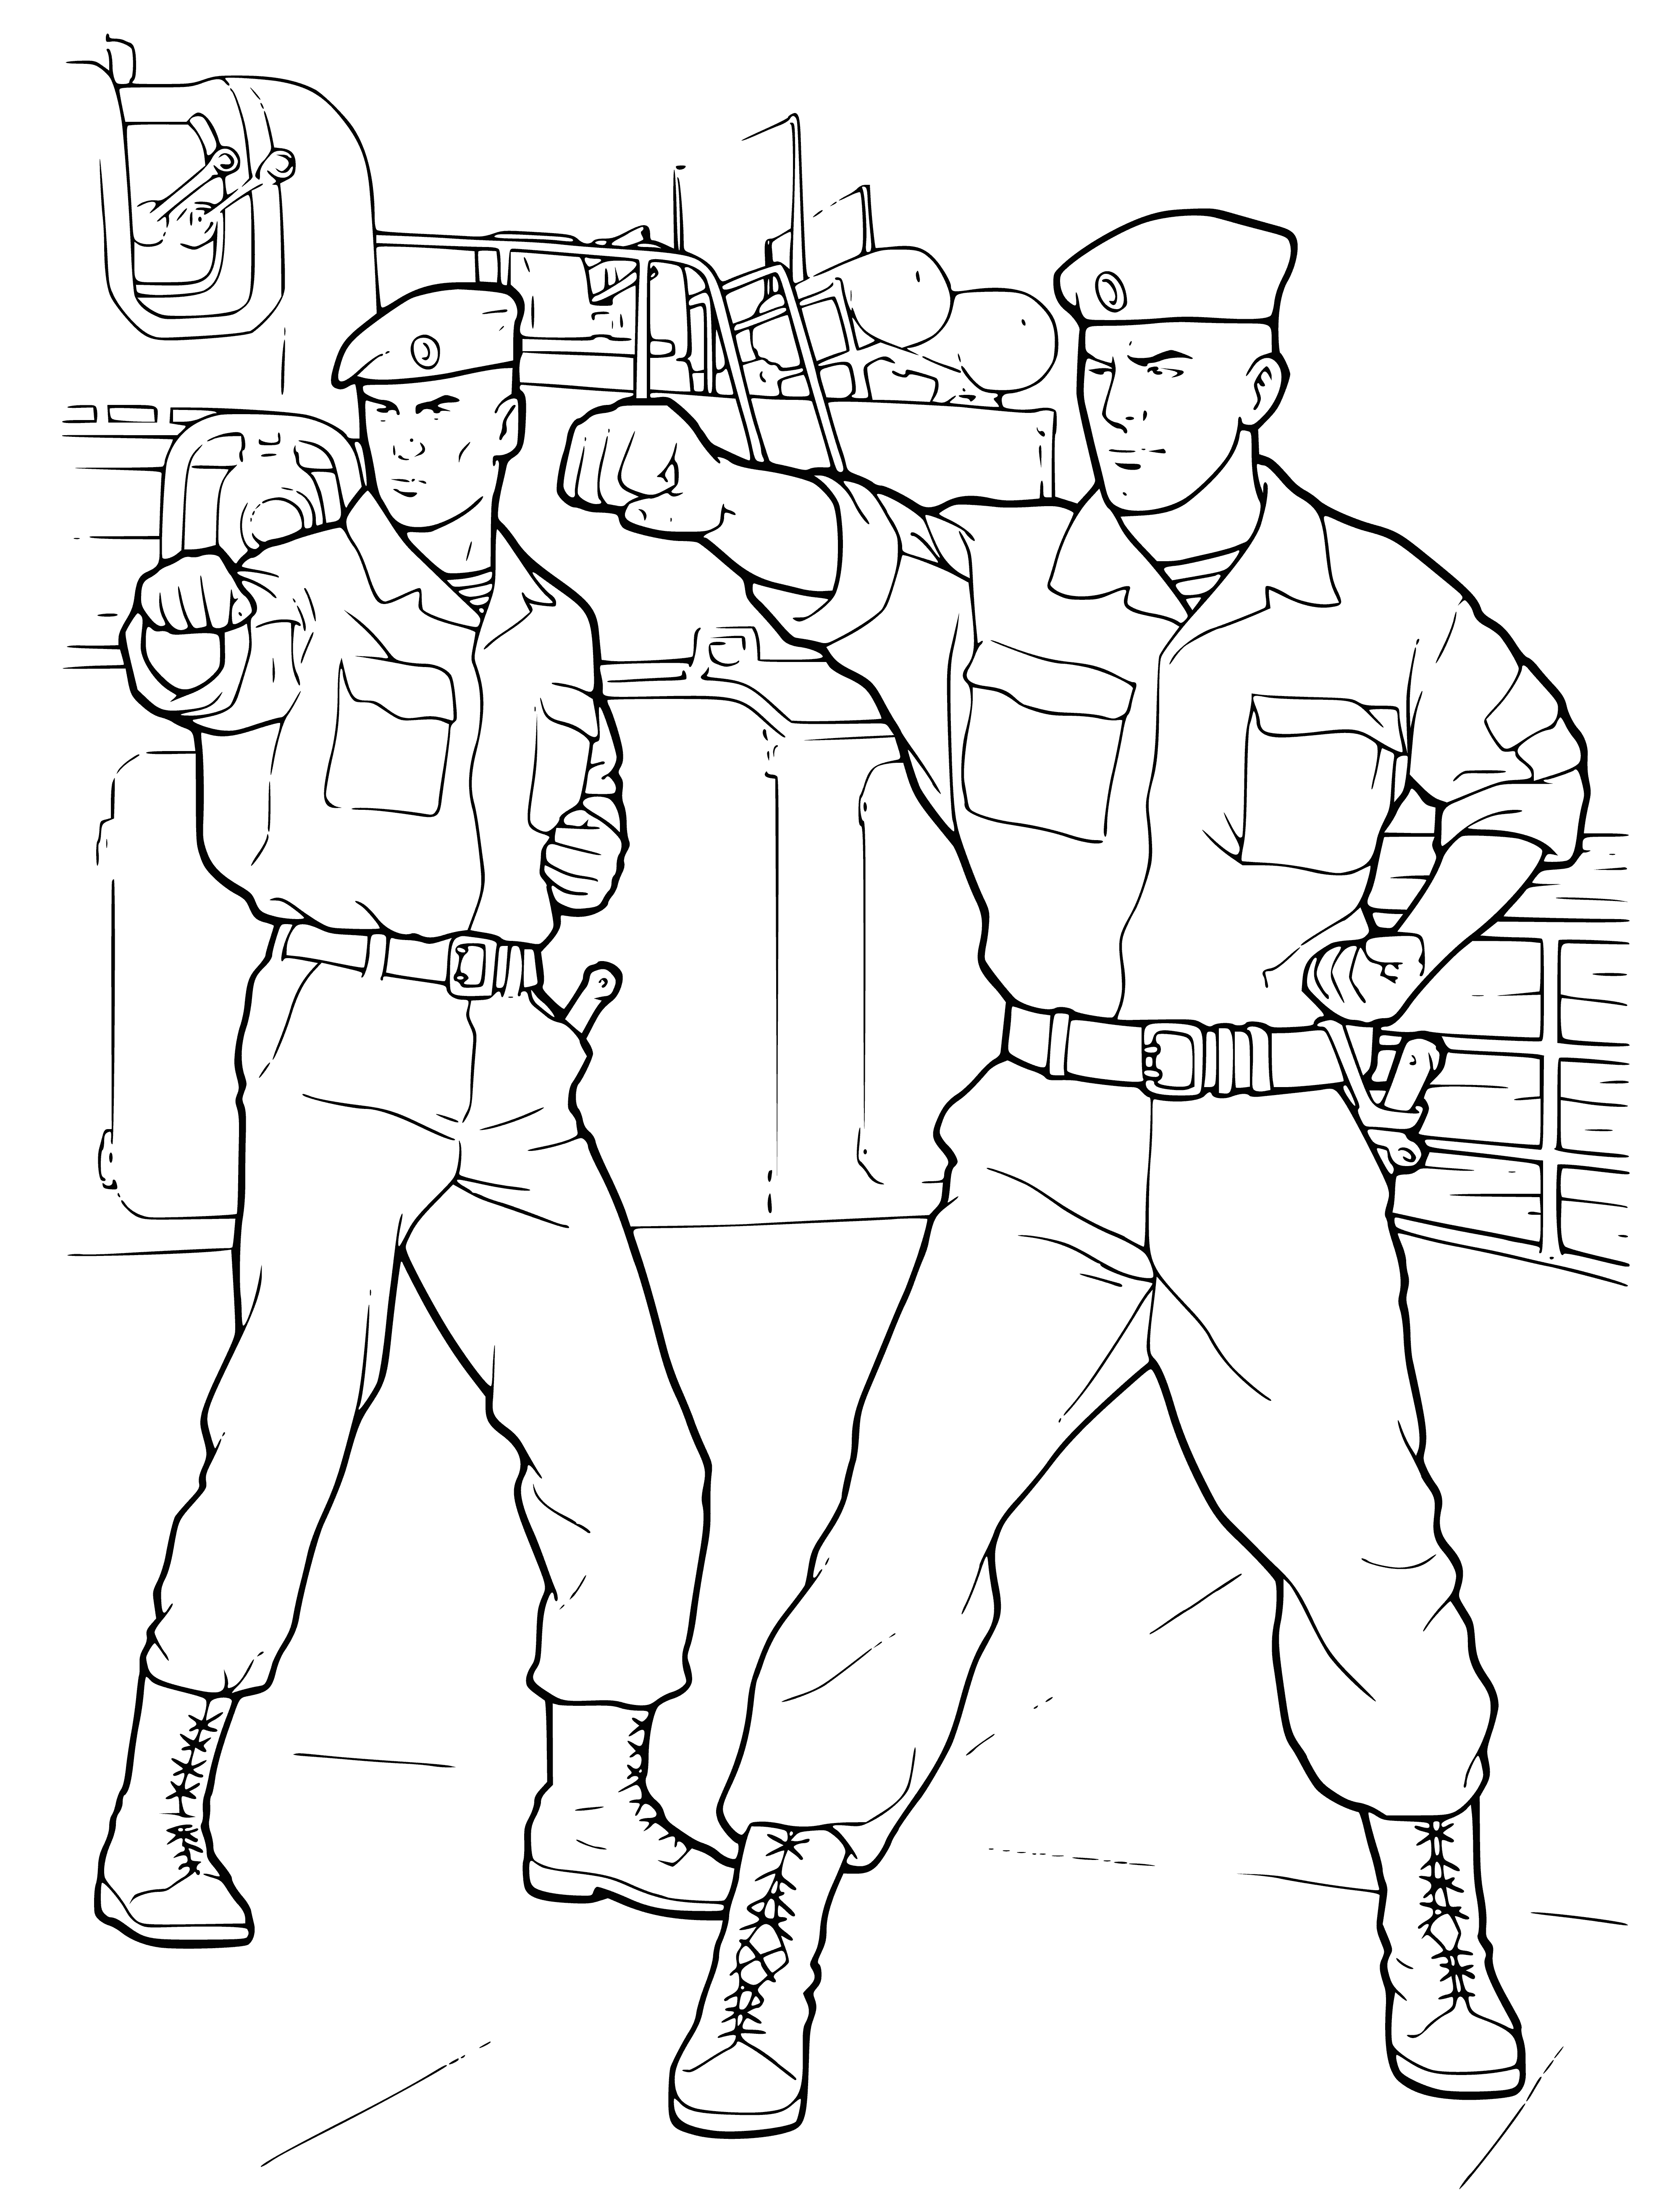 Russian army soldiers coloring page